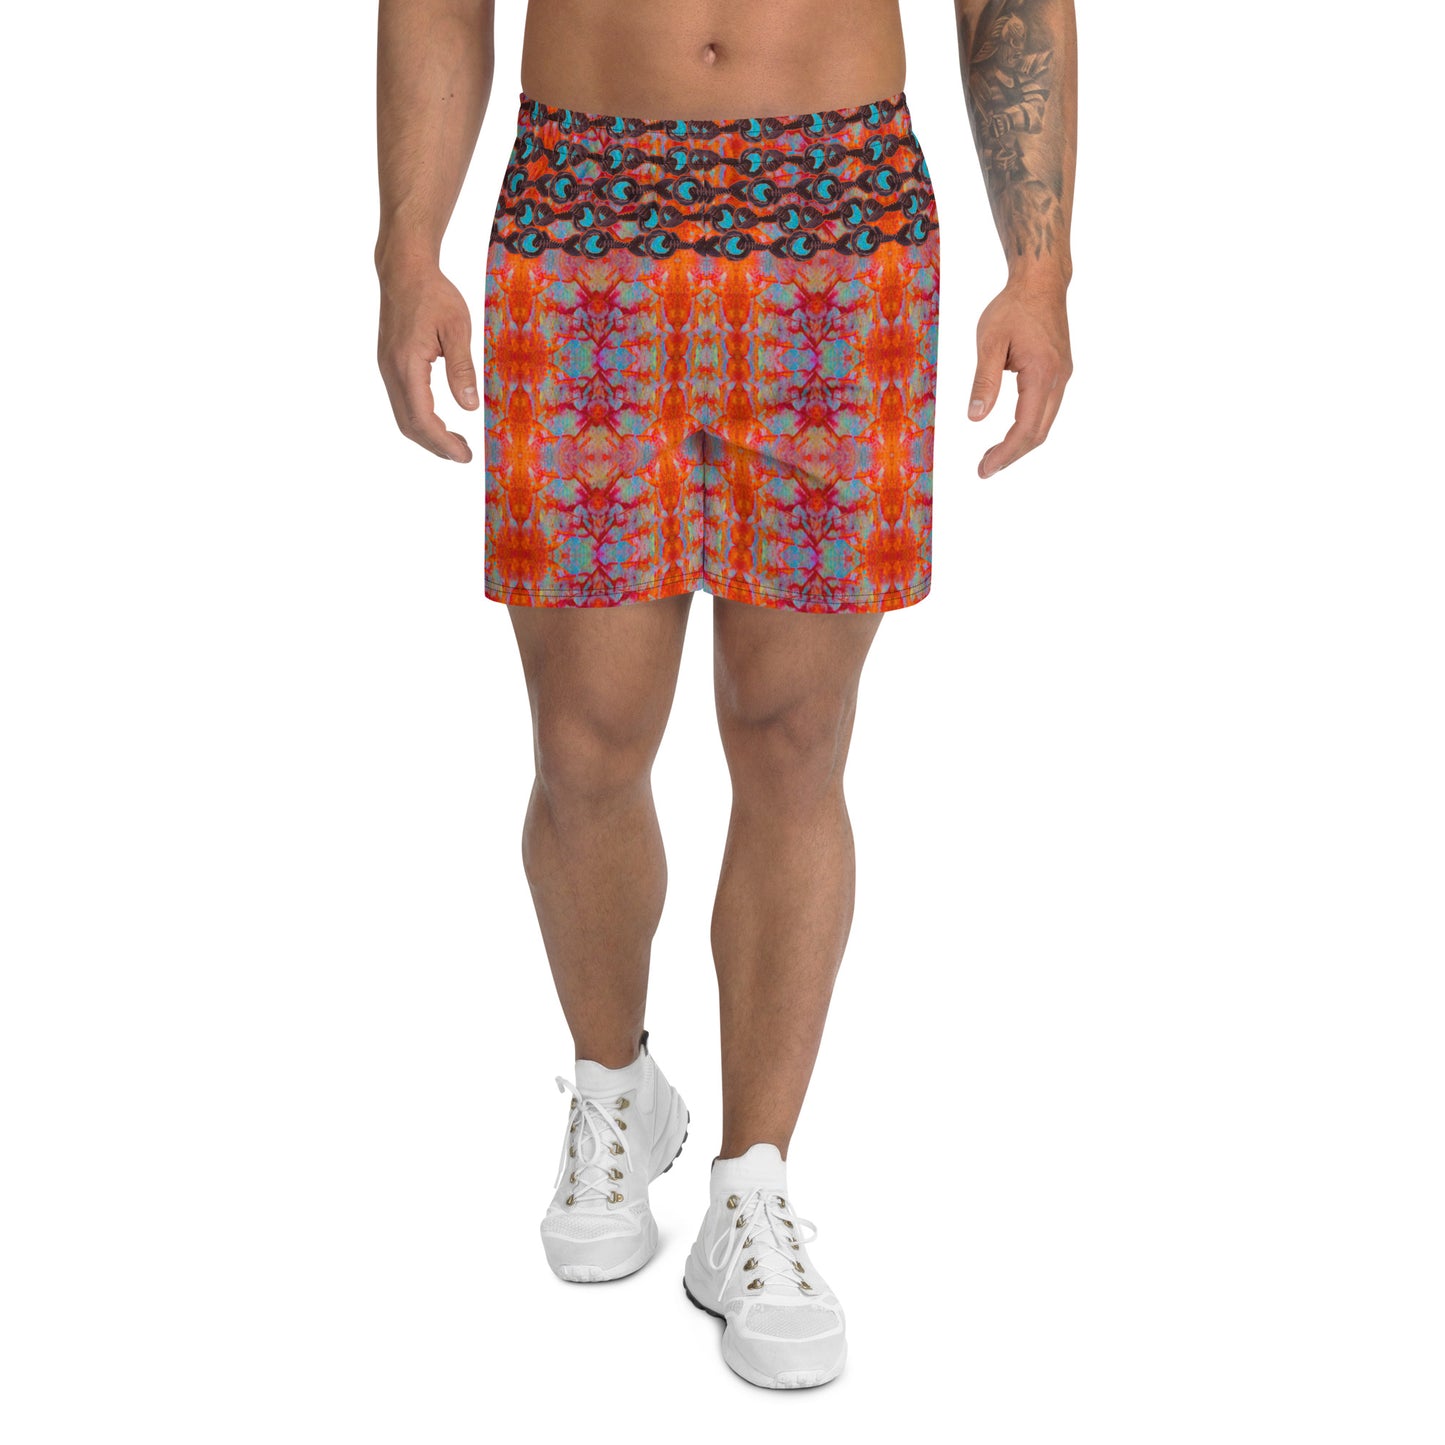 Athletic Long Shorts (His/They) (Grail Night Rose Blue Logo) RJSTH@Fabric#12 RJSTHS2021 RJS